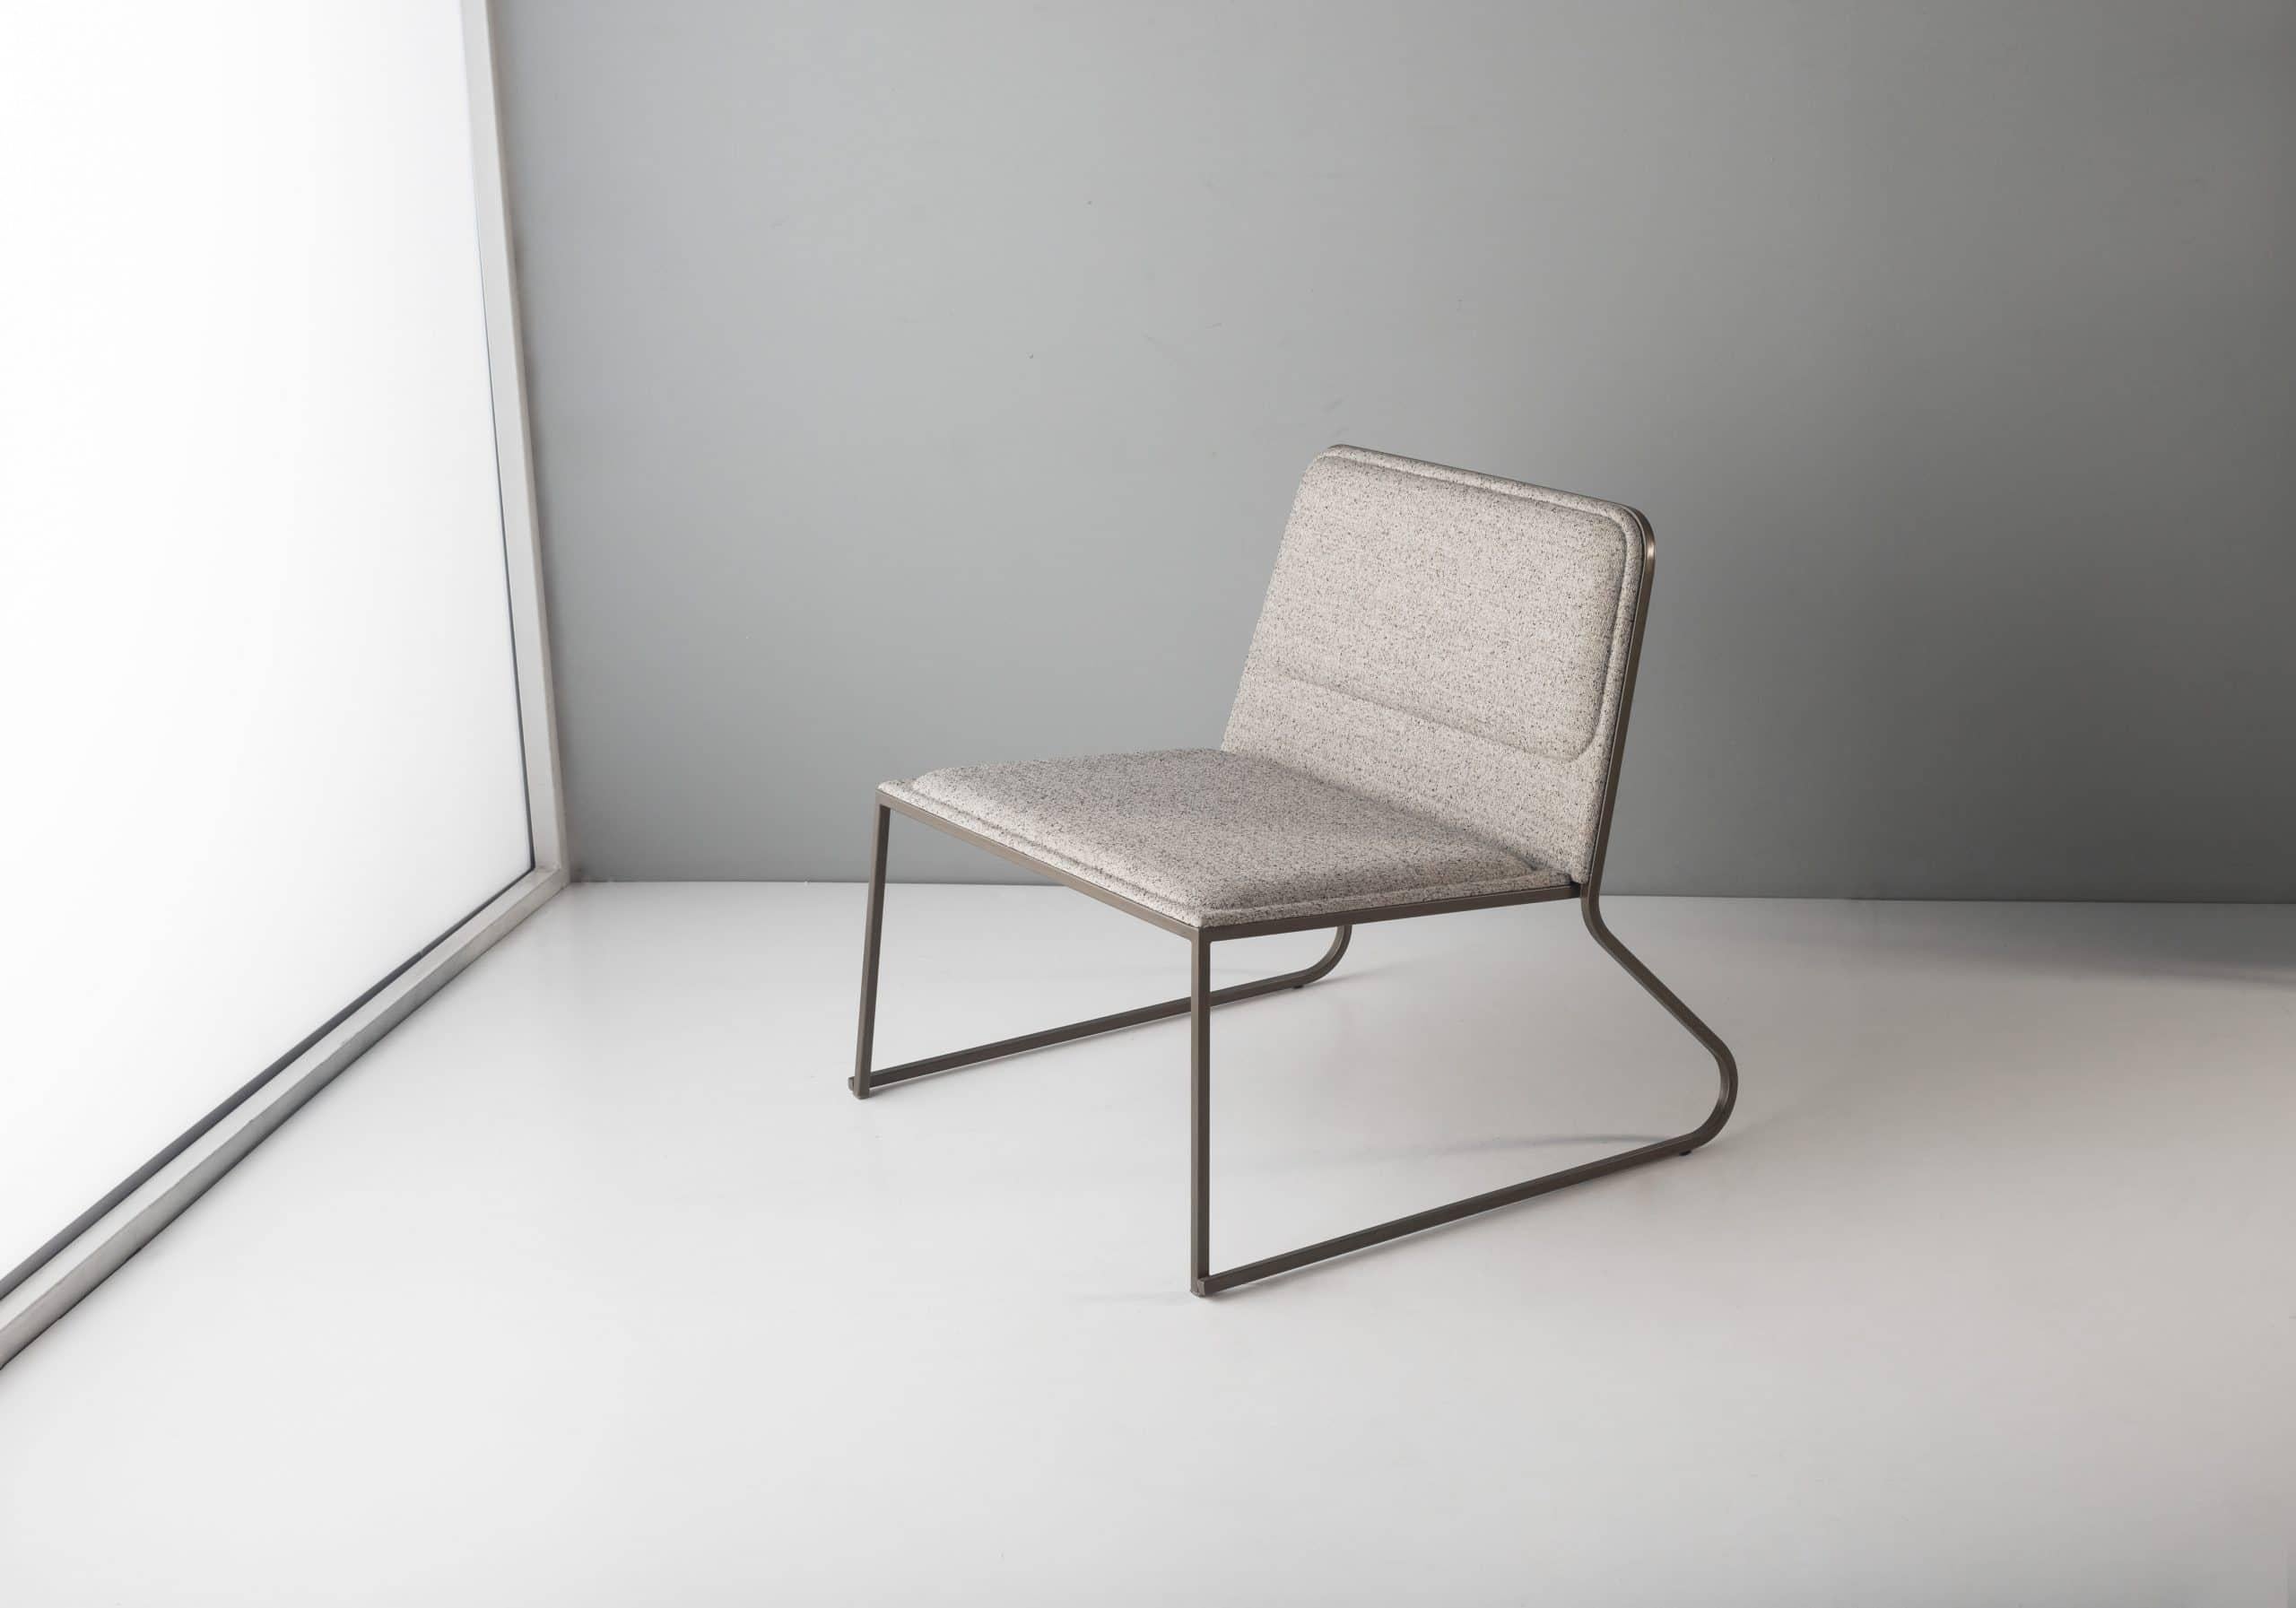 Bora Lounge Chair by Doimo Brasil
Dimensions: W 79 x D 72 x H 72 cm 
Materials: Paint, Fabric, upholstered seat.


With the intention of providing good taste and personality, Doimo deciphers trends and follows the evolution of man and his space. To